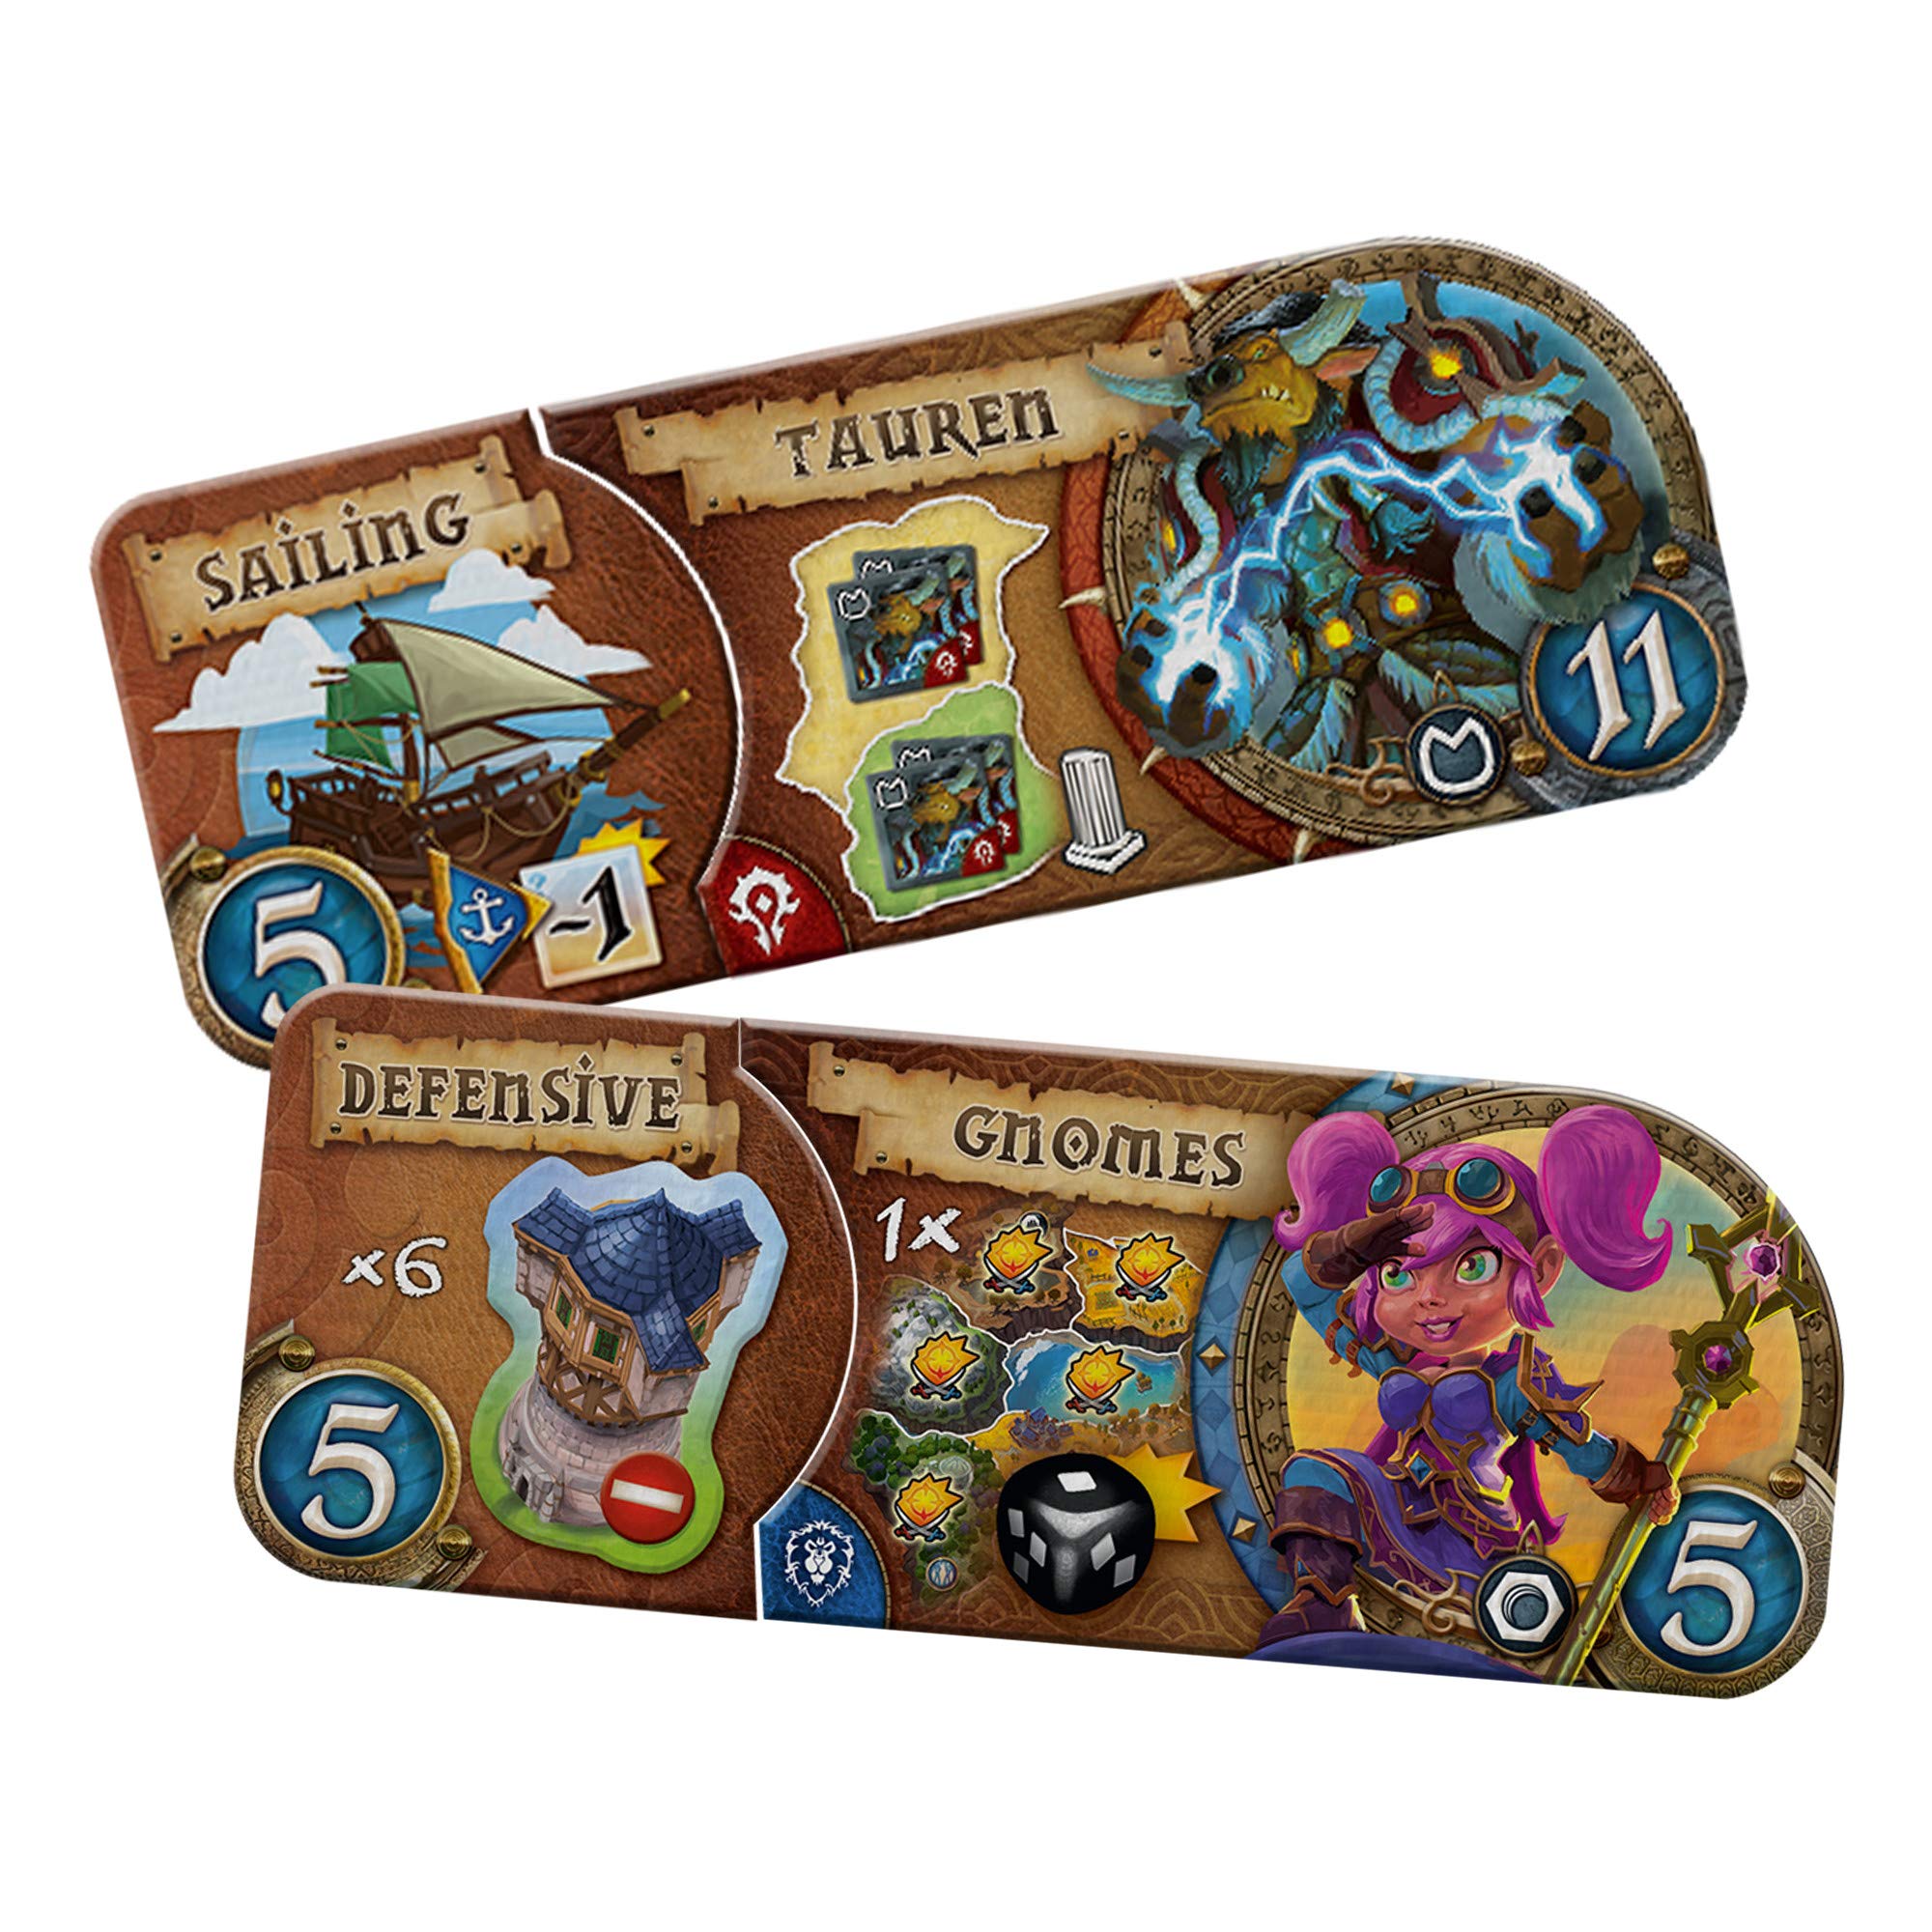 Small World of Warcraft Board Game | Fantasy Civilization Game for Family Night | Strategy Game for Adults and Kids | Ages 8+ | 2-5 Players | Avg. Playtime 40-80 Minutes | Made by Days of Wonder